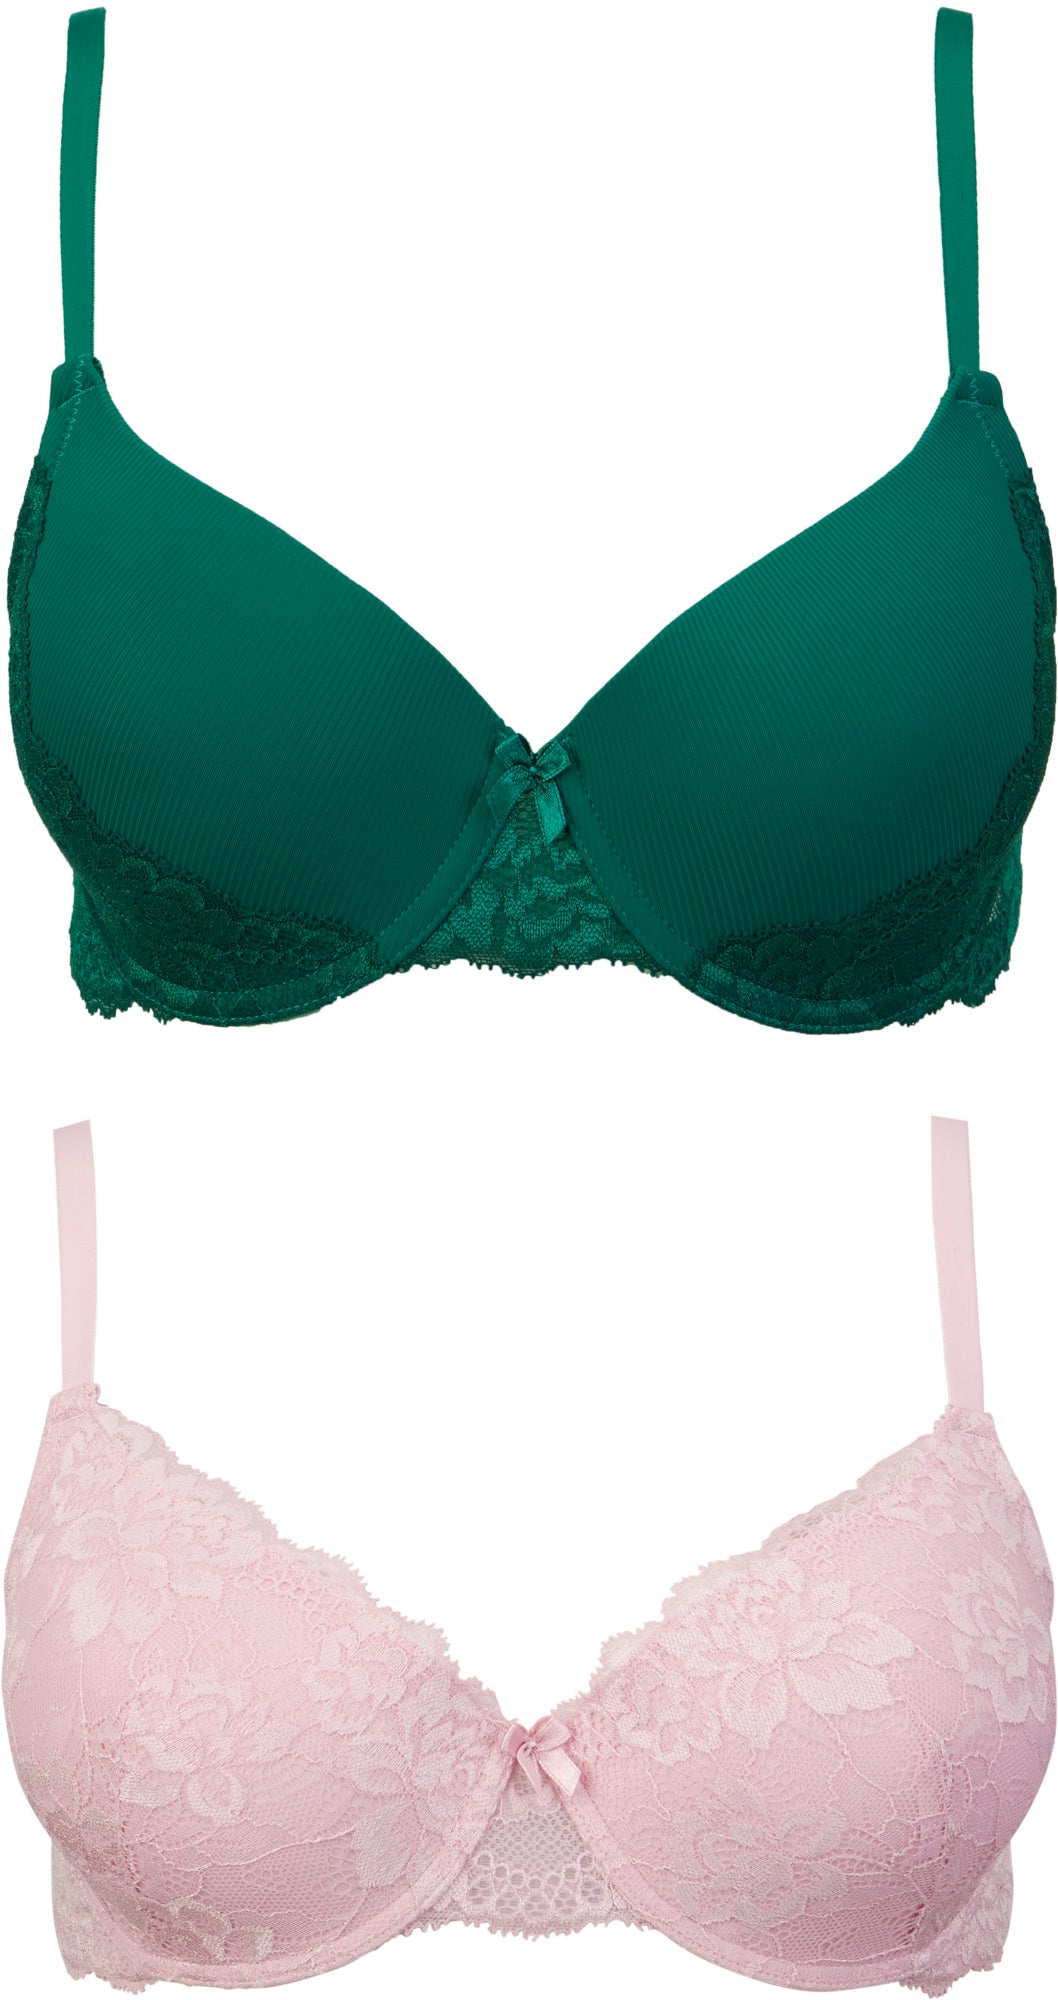 https://www.postie.co.nz/content/products/womens-sarah-full-figure-bra-2-pack-cherry-blossomaventurine-a-outfit-819274.jpg